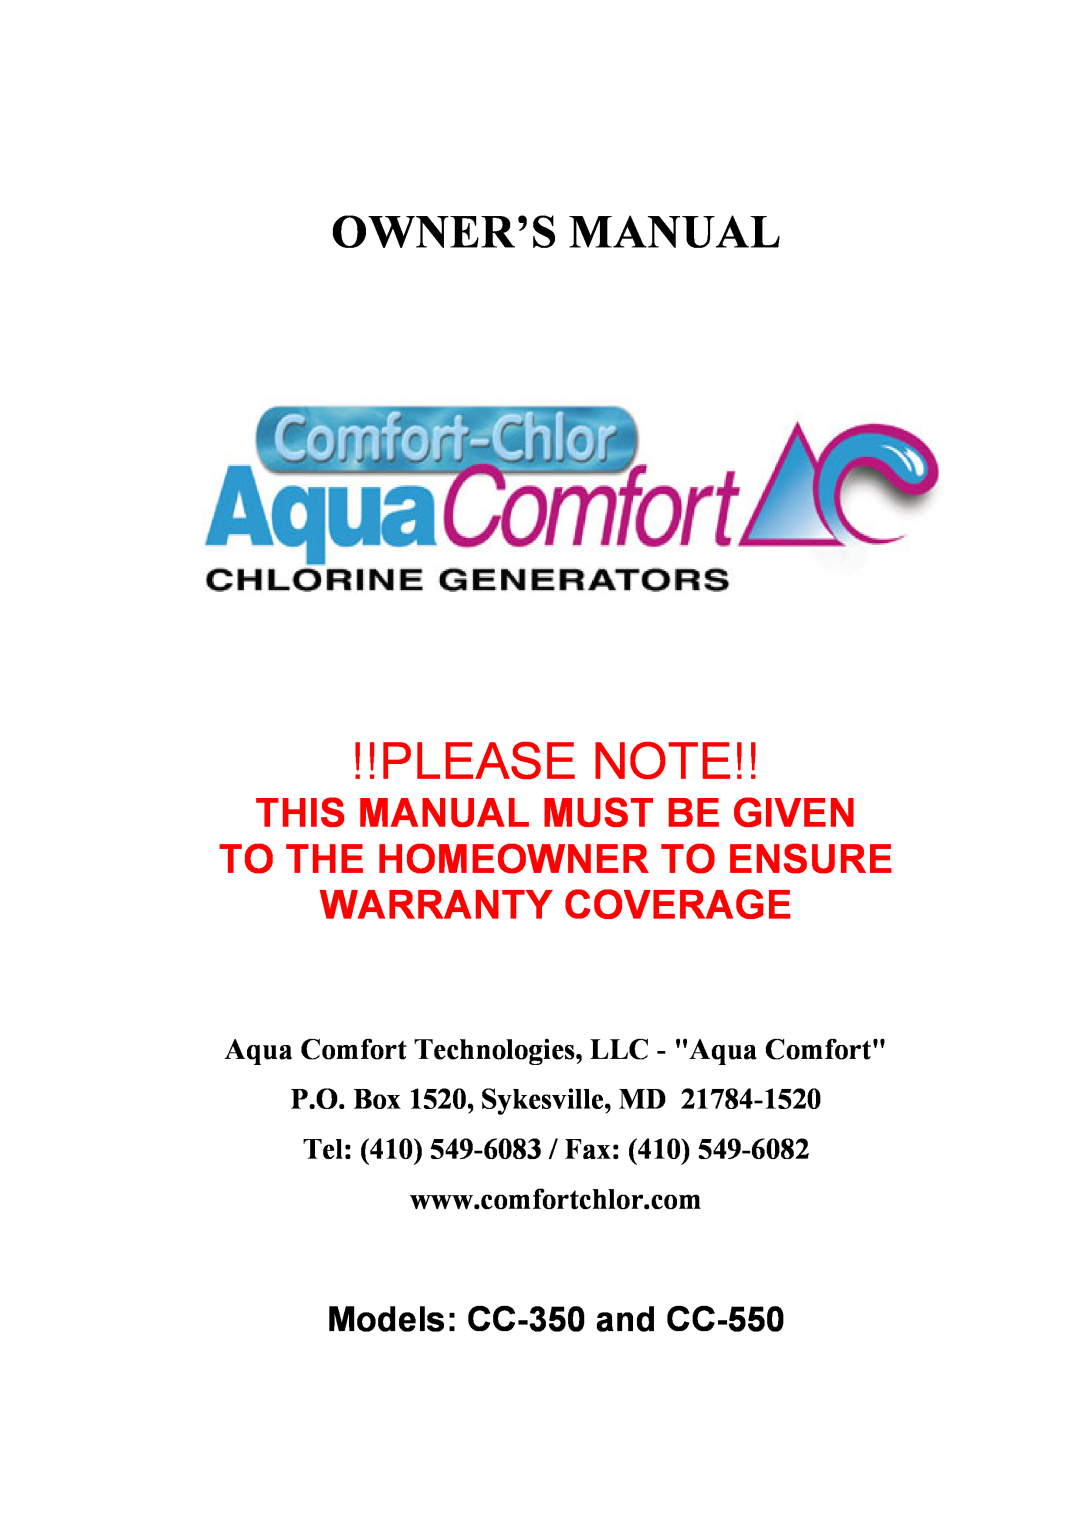 Aqua Products CC-550 owner manual Please Note, Owner’S Manual, This Manual Must Be Given To The Homeowner To Ensure 